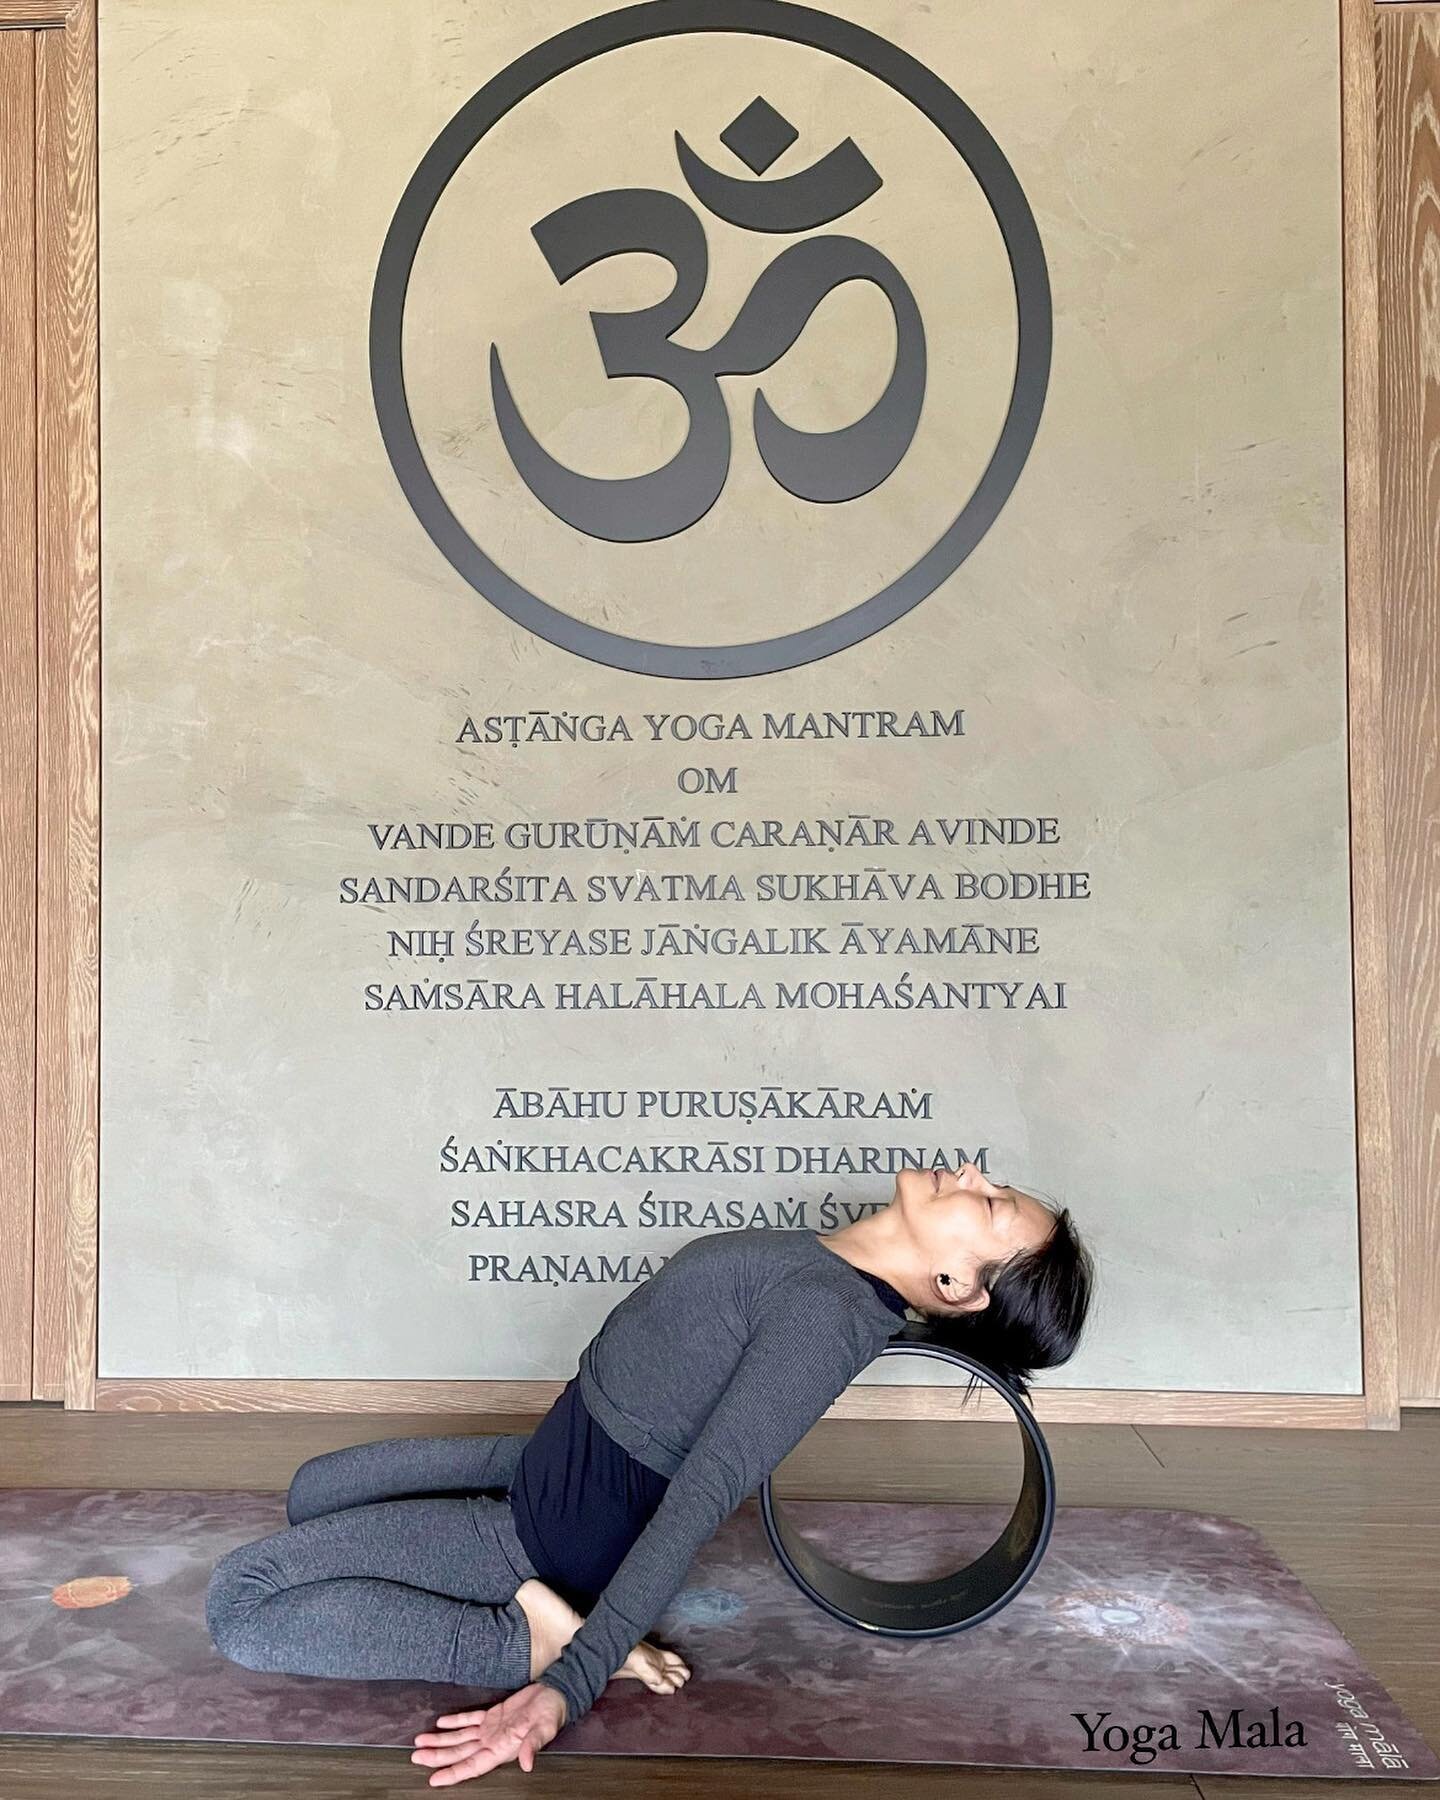 Coming in March!
Open and Release: Yoga on Wheel Workshop With Lily 

Date: March 18 (Sat)
Time: 10:30 AM - 12 PM
Fee: $300
WhatsApp: 5941 0336

Lengthen your spine, open your hips, release your shoulders and neck safely
with the support of the Yoga 